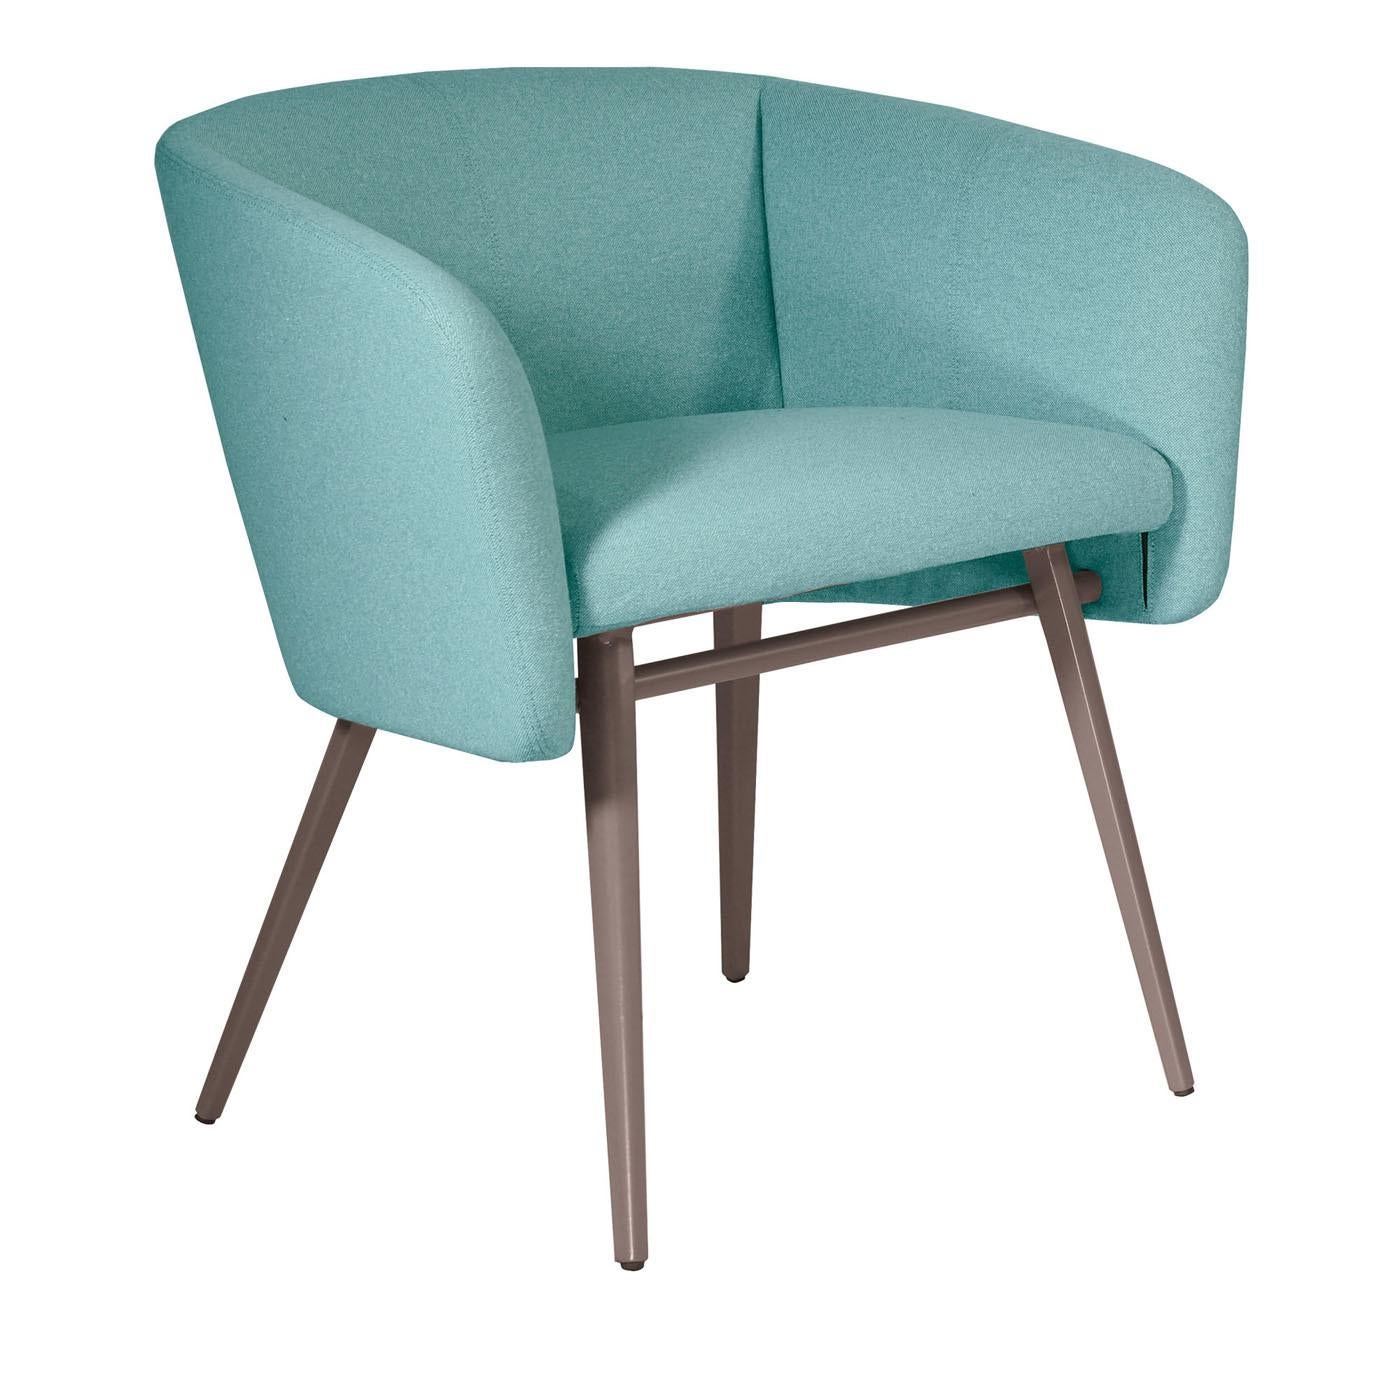 Inspired by the welcoming and comfortable design of the traditional tub chair, this piece features a gray-lacquered structure in beechwood with tall and slanted legs. A light blue fabric upholsters the seat, back, and armrests that are padded with